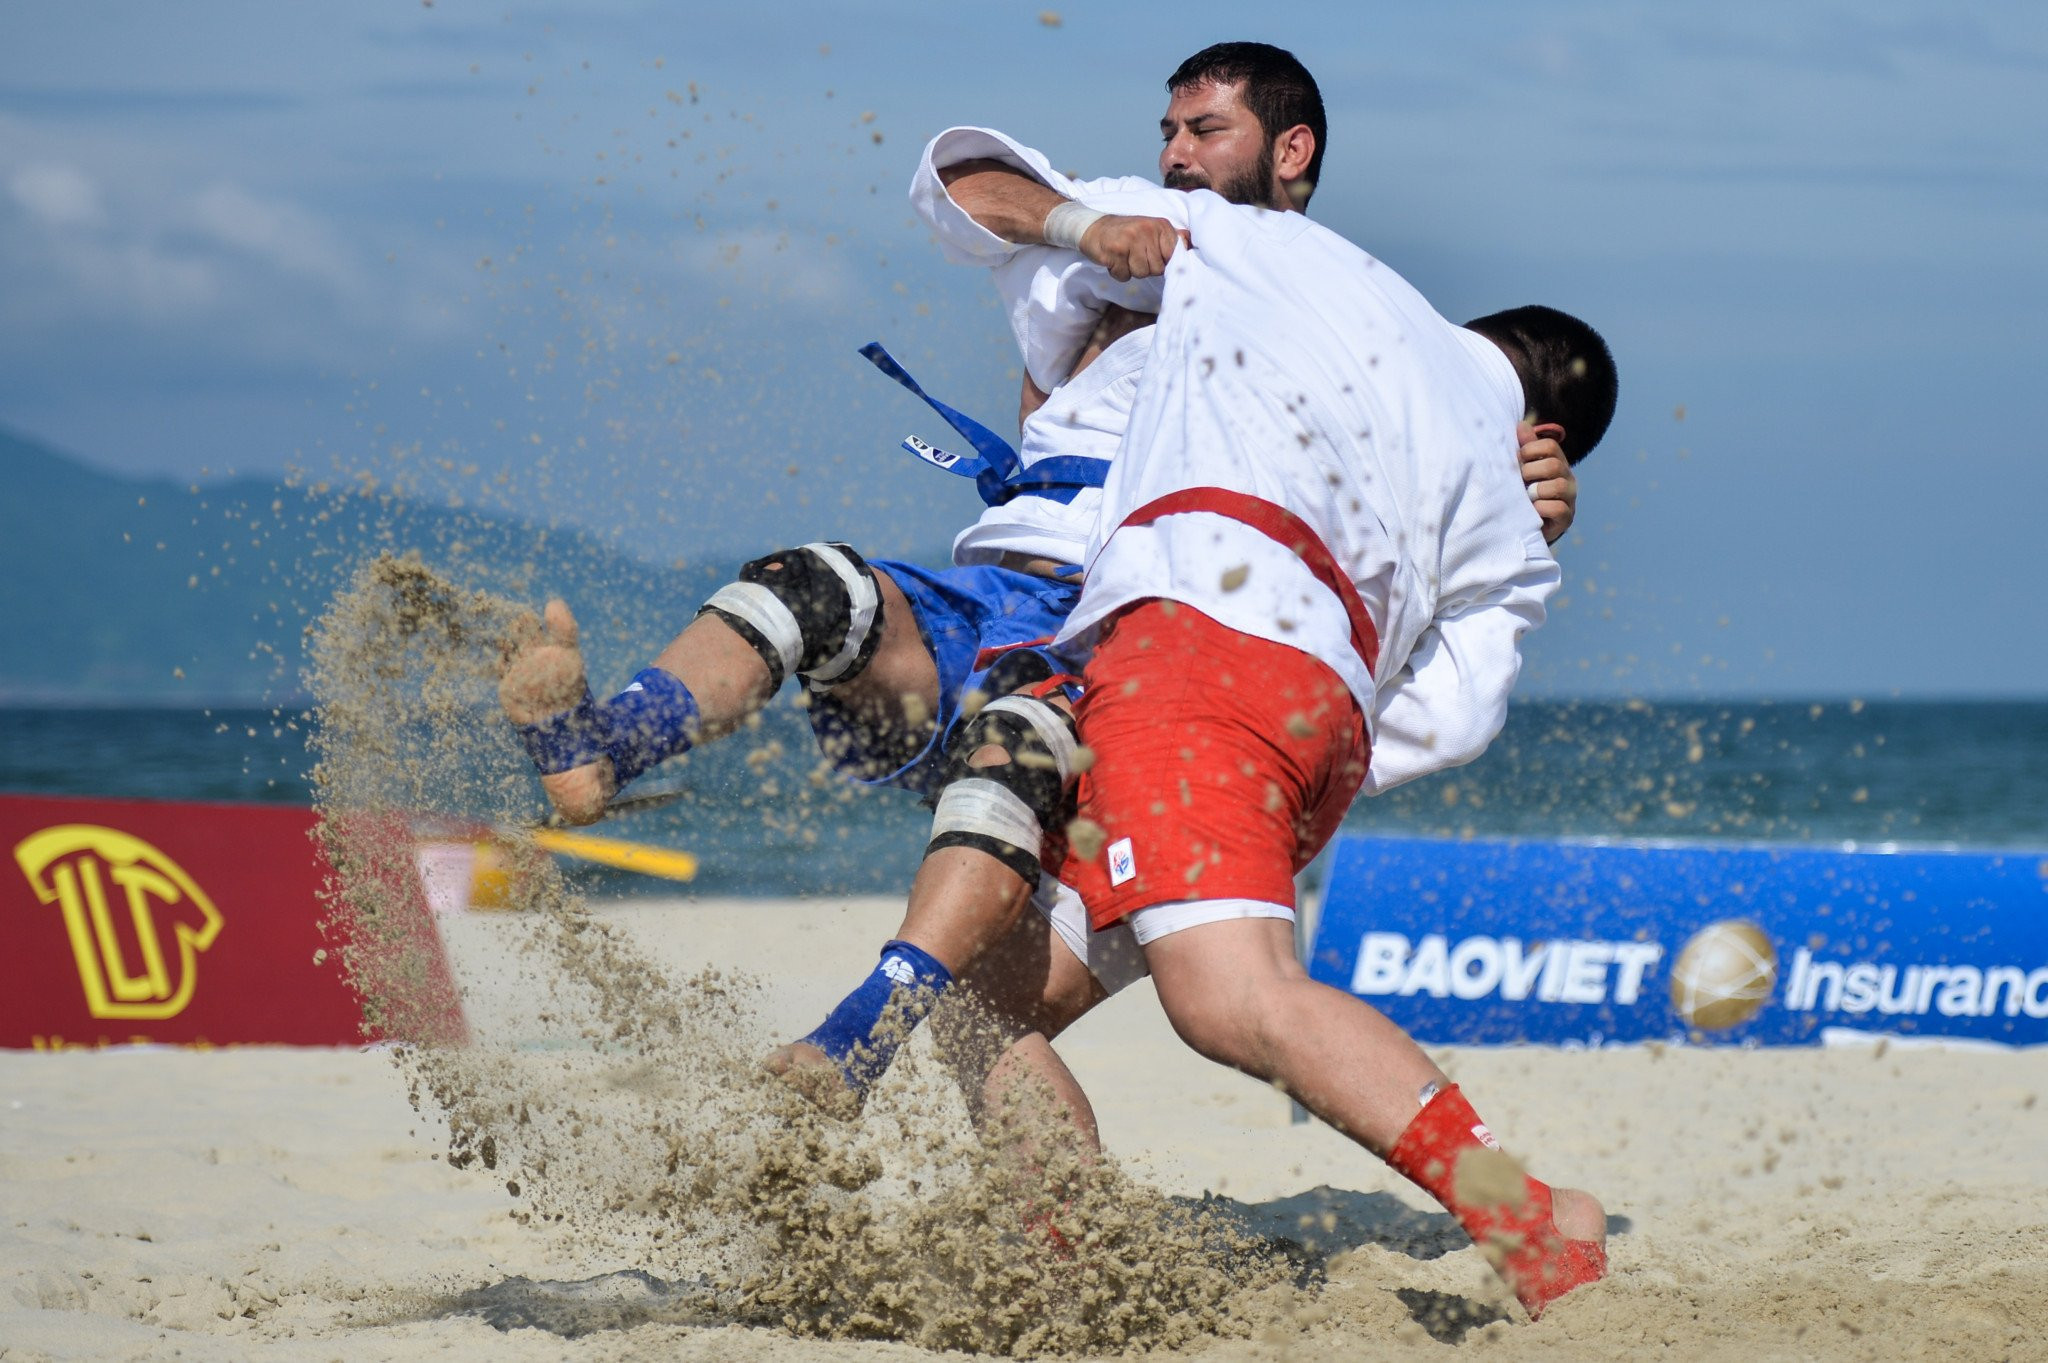 Cyprus is set to stage the inaugural World Beach Sambo Championships later this year ©FIAS